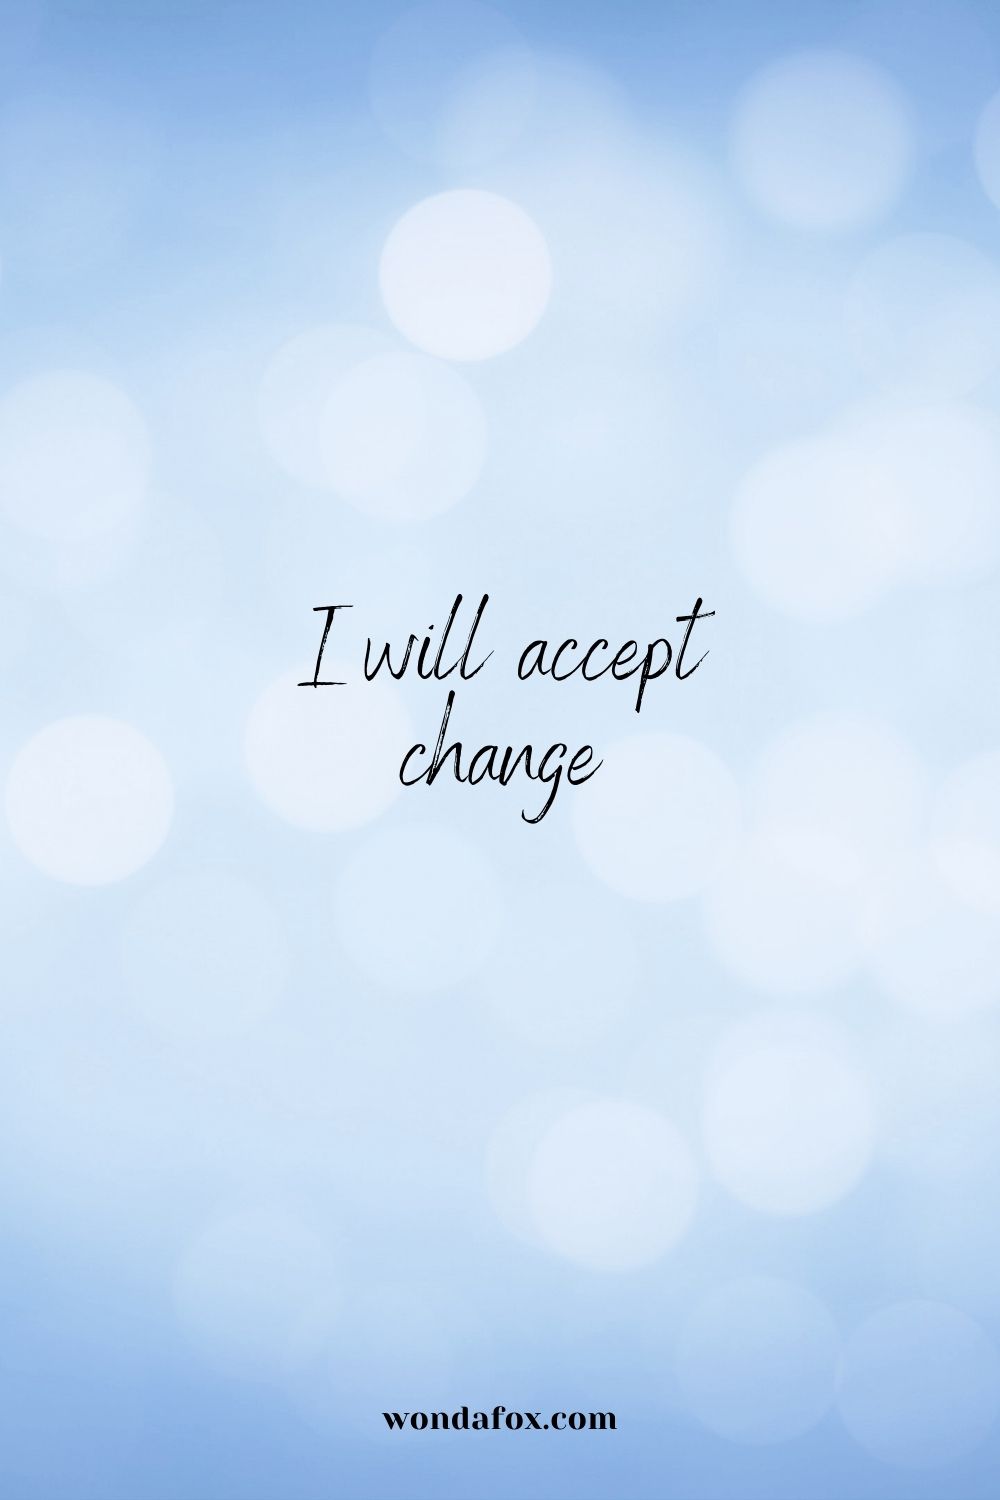 I will accept change